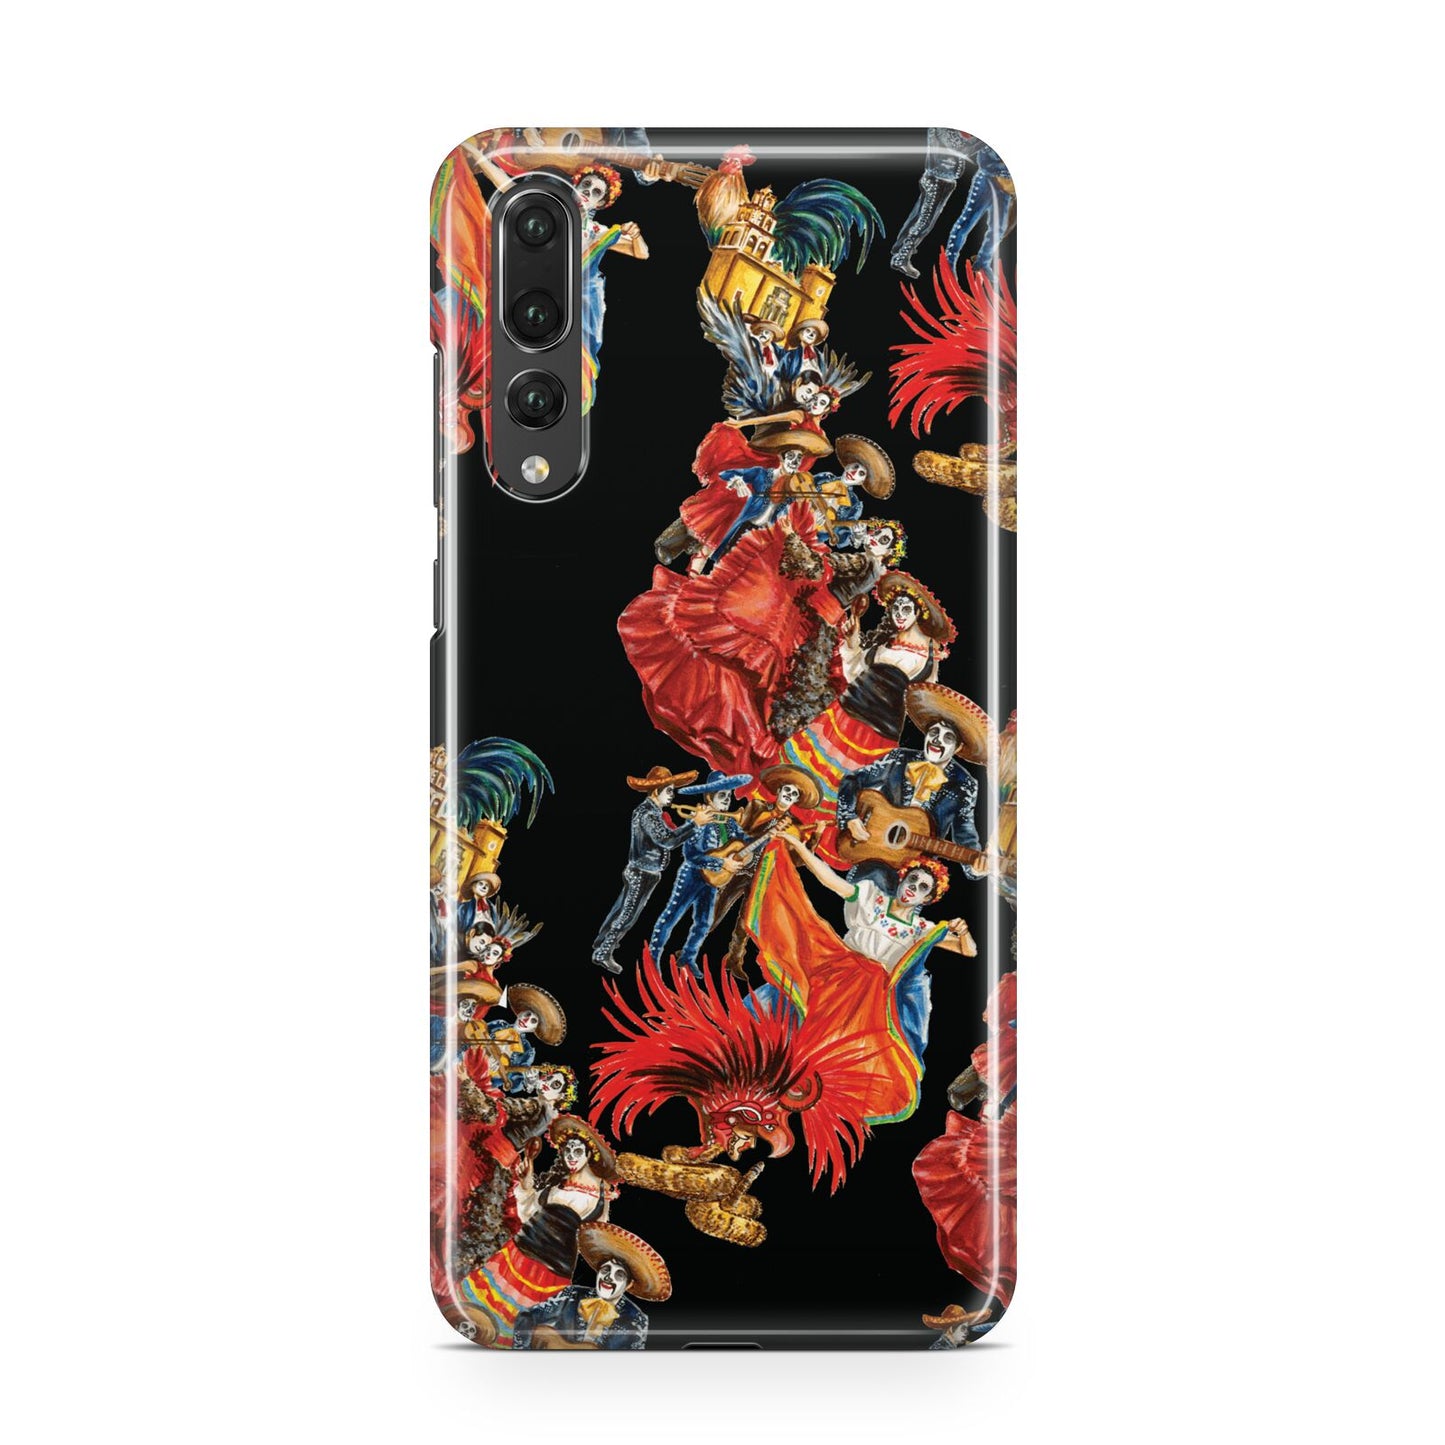 Day of the Dead Festival Huawei P20 Pro Phone Case